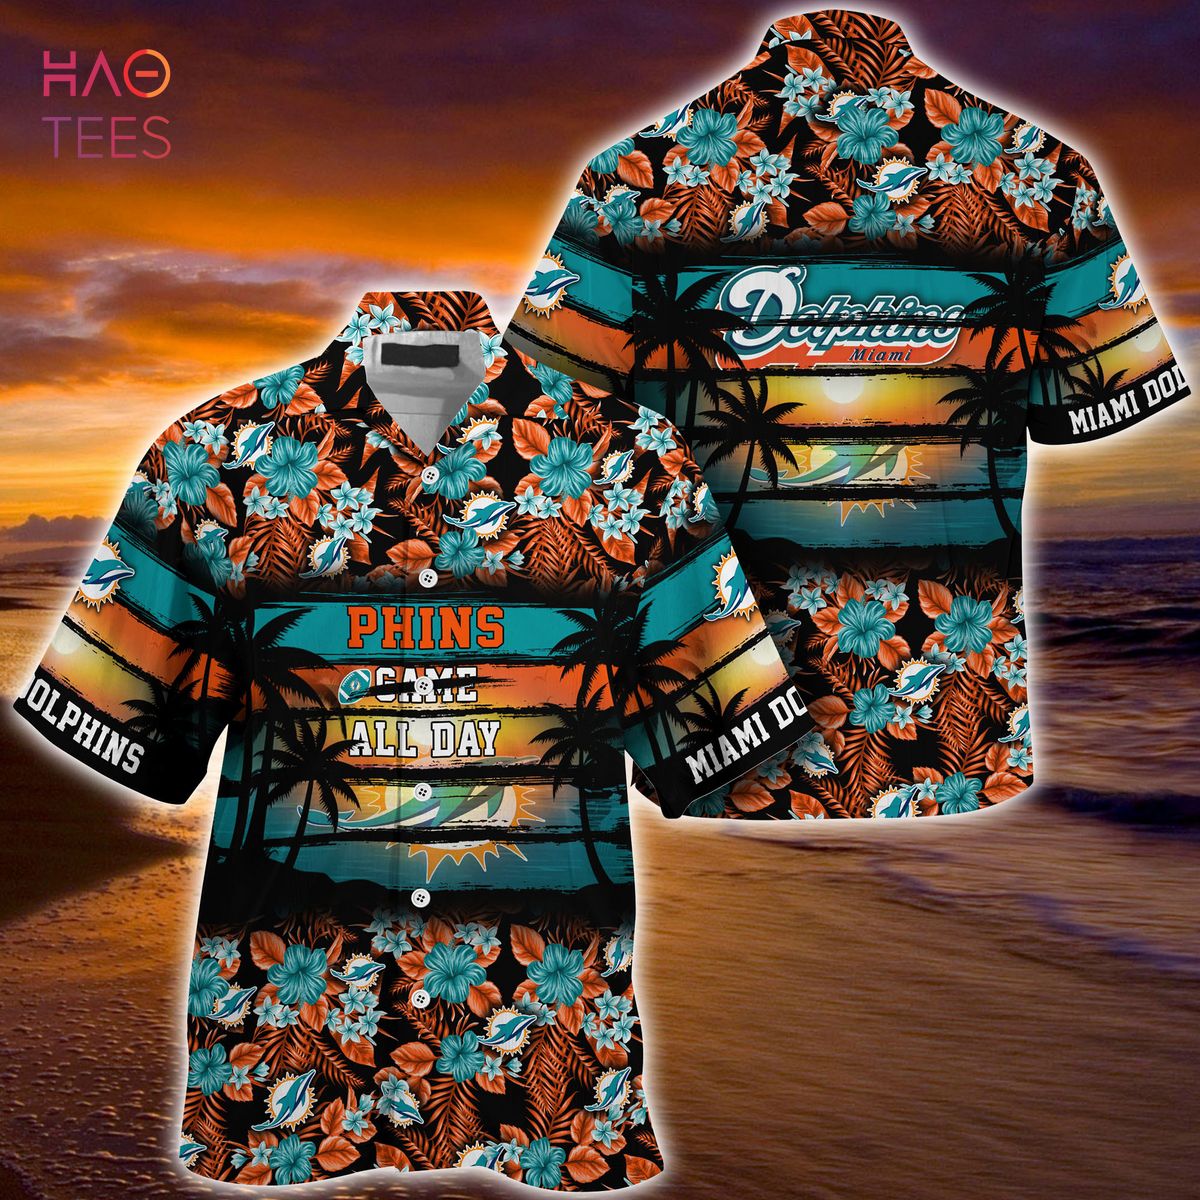 Miami Dolphins Shop - TRENDING Miami Dolphins NFL Summer Hawaiian Shirt Floral Pattern For Sports Enthusiast This Year 1